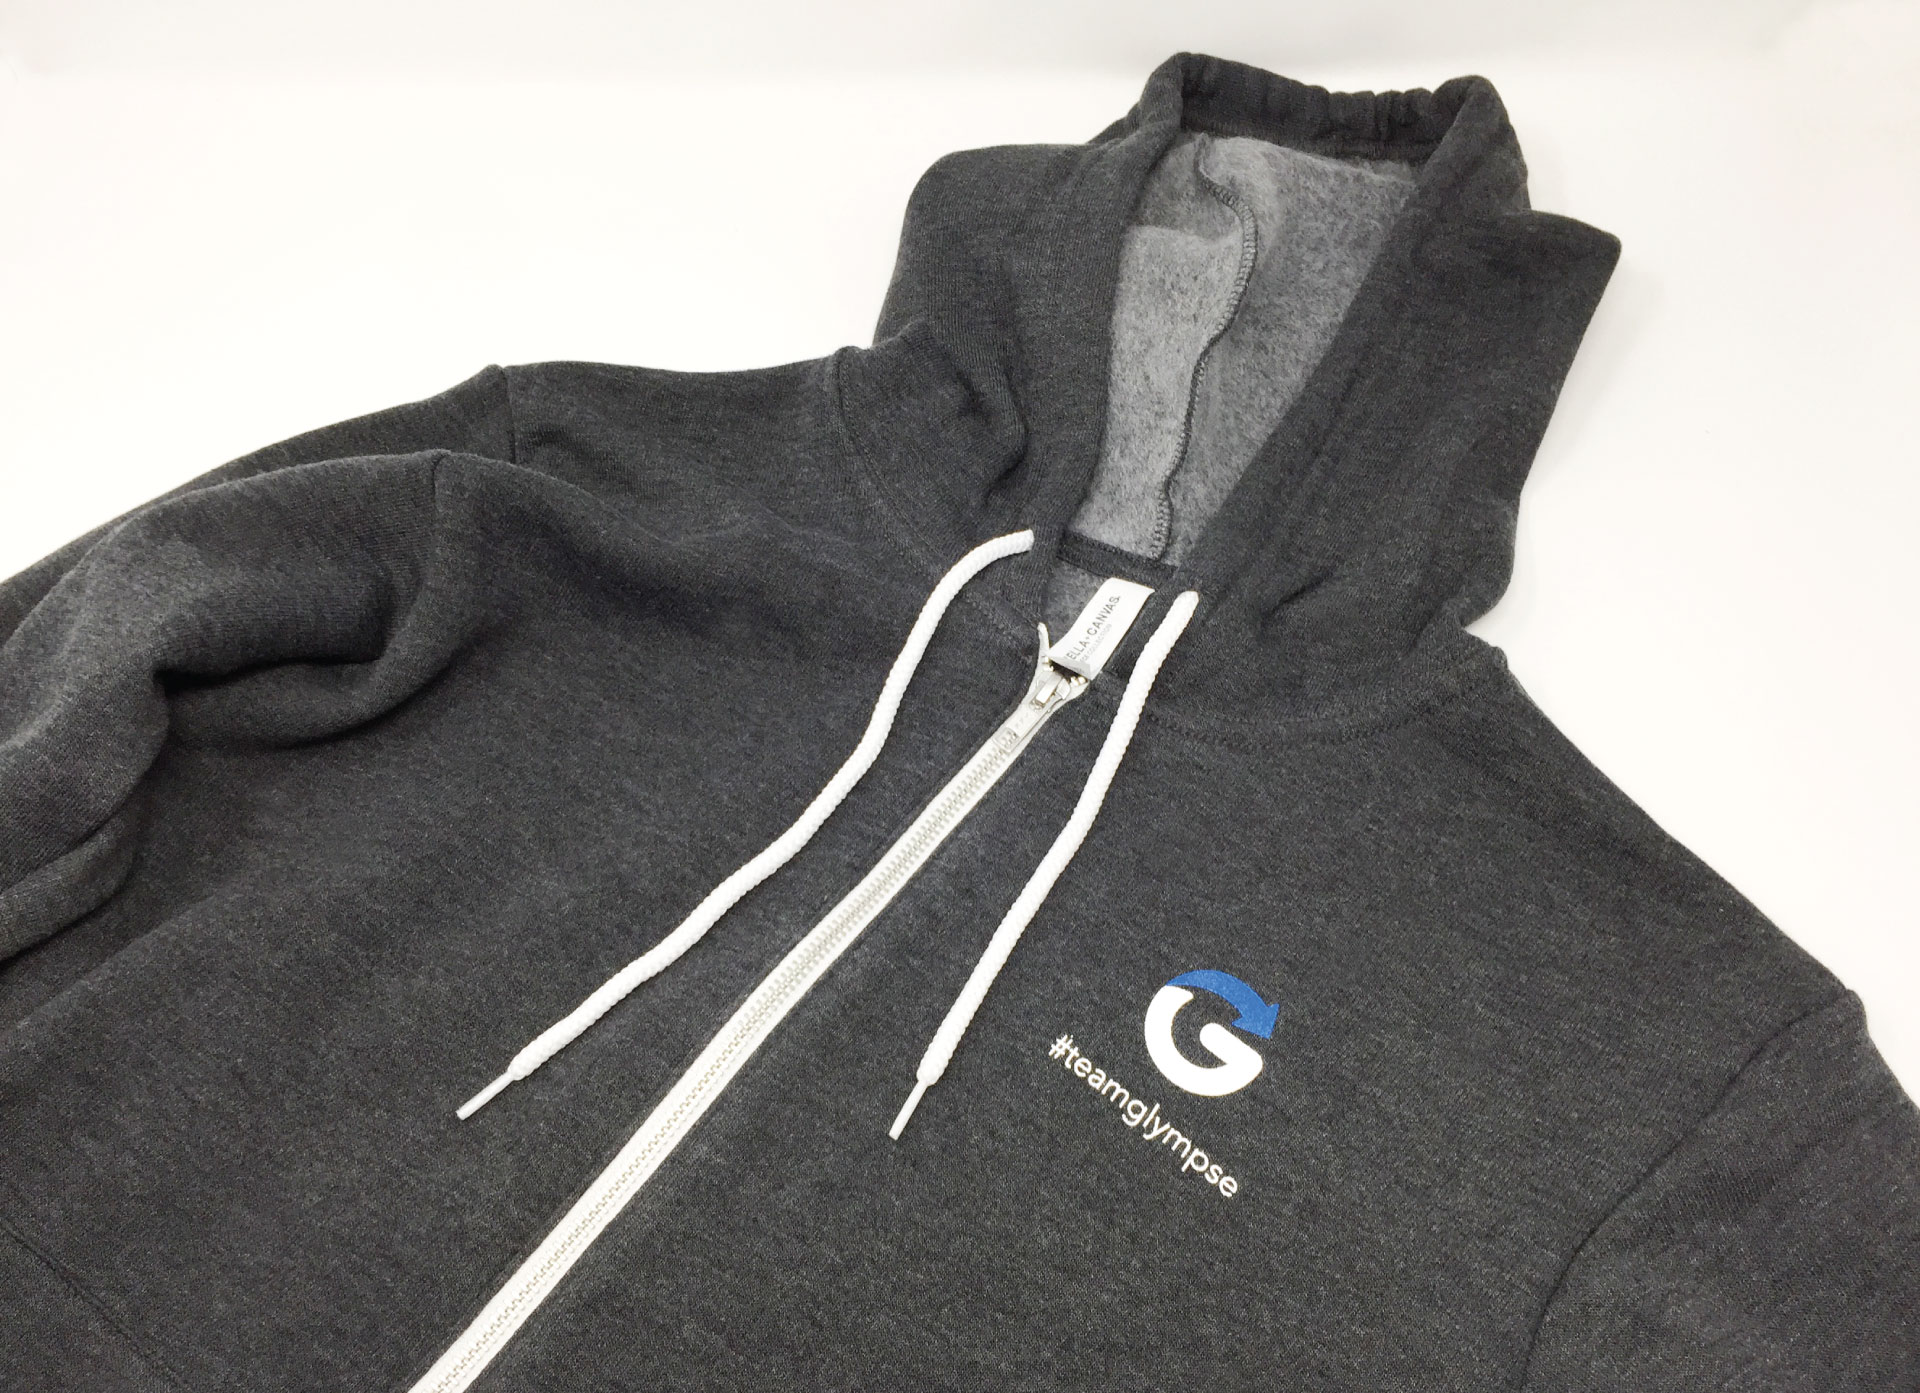 Glympse Hoodies by Ontra Marketing Group